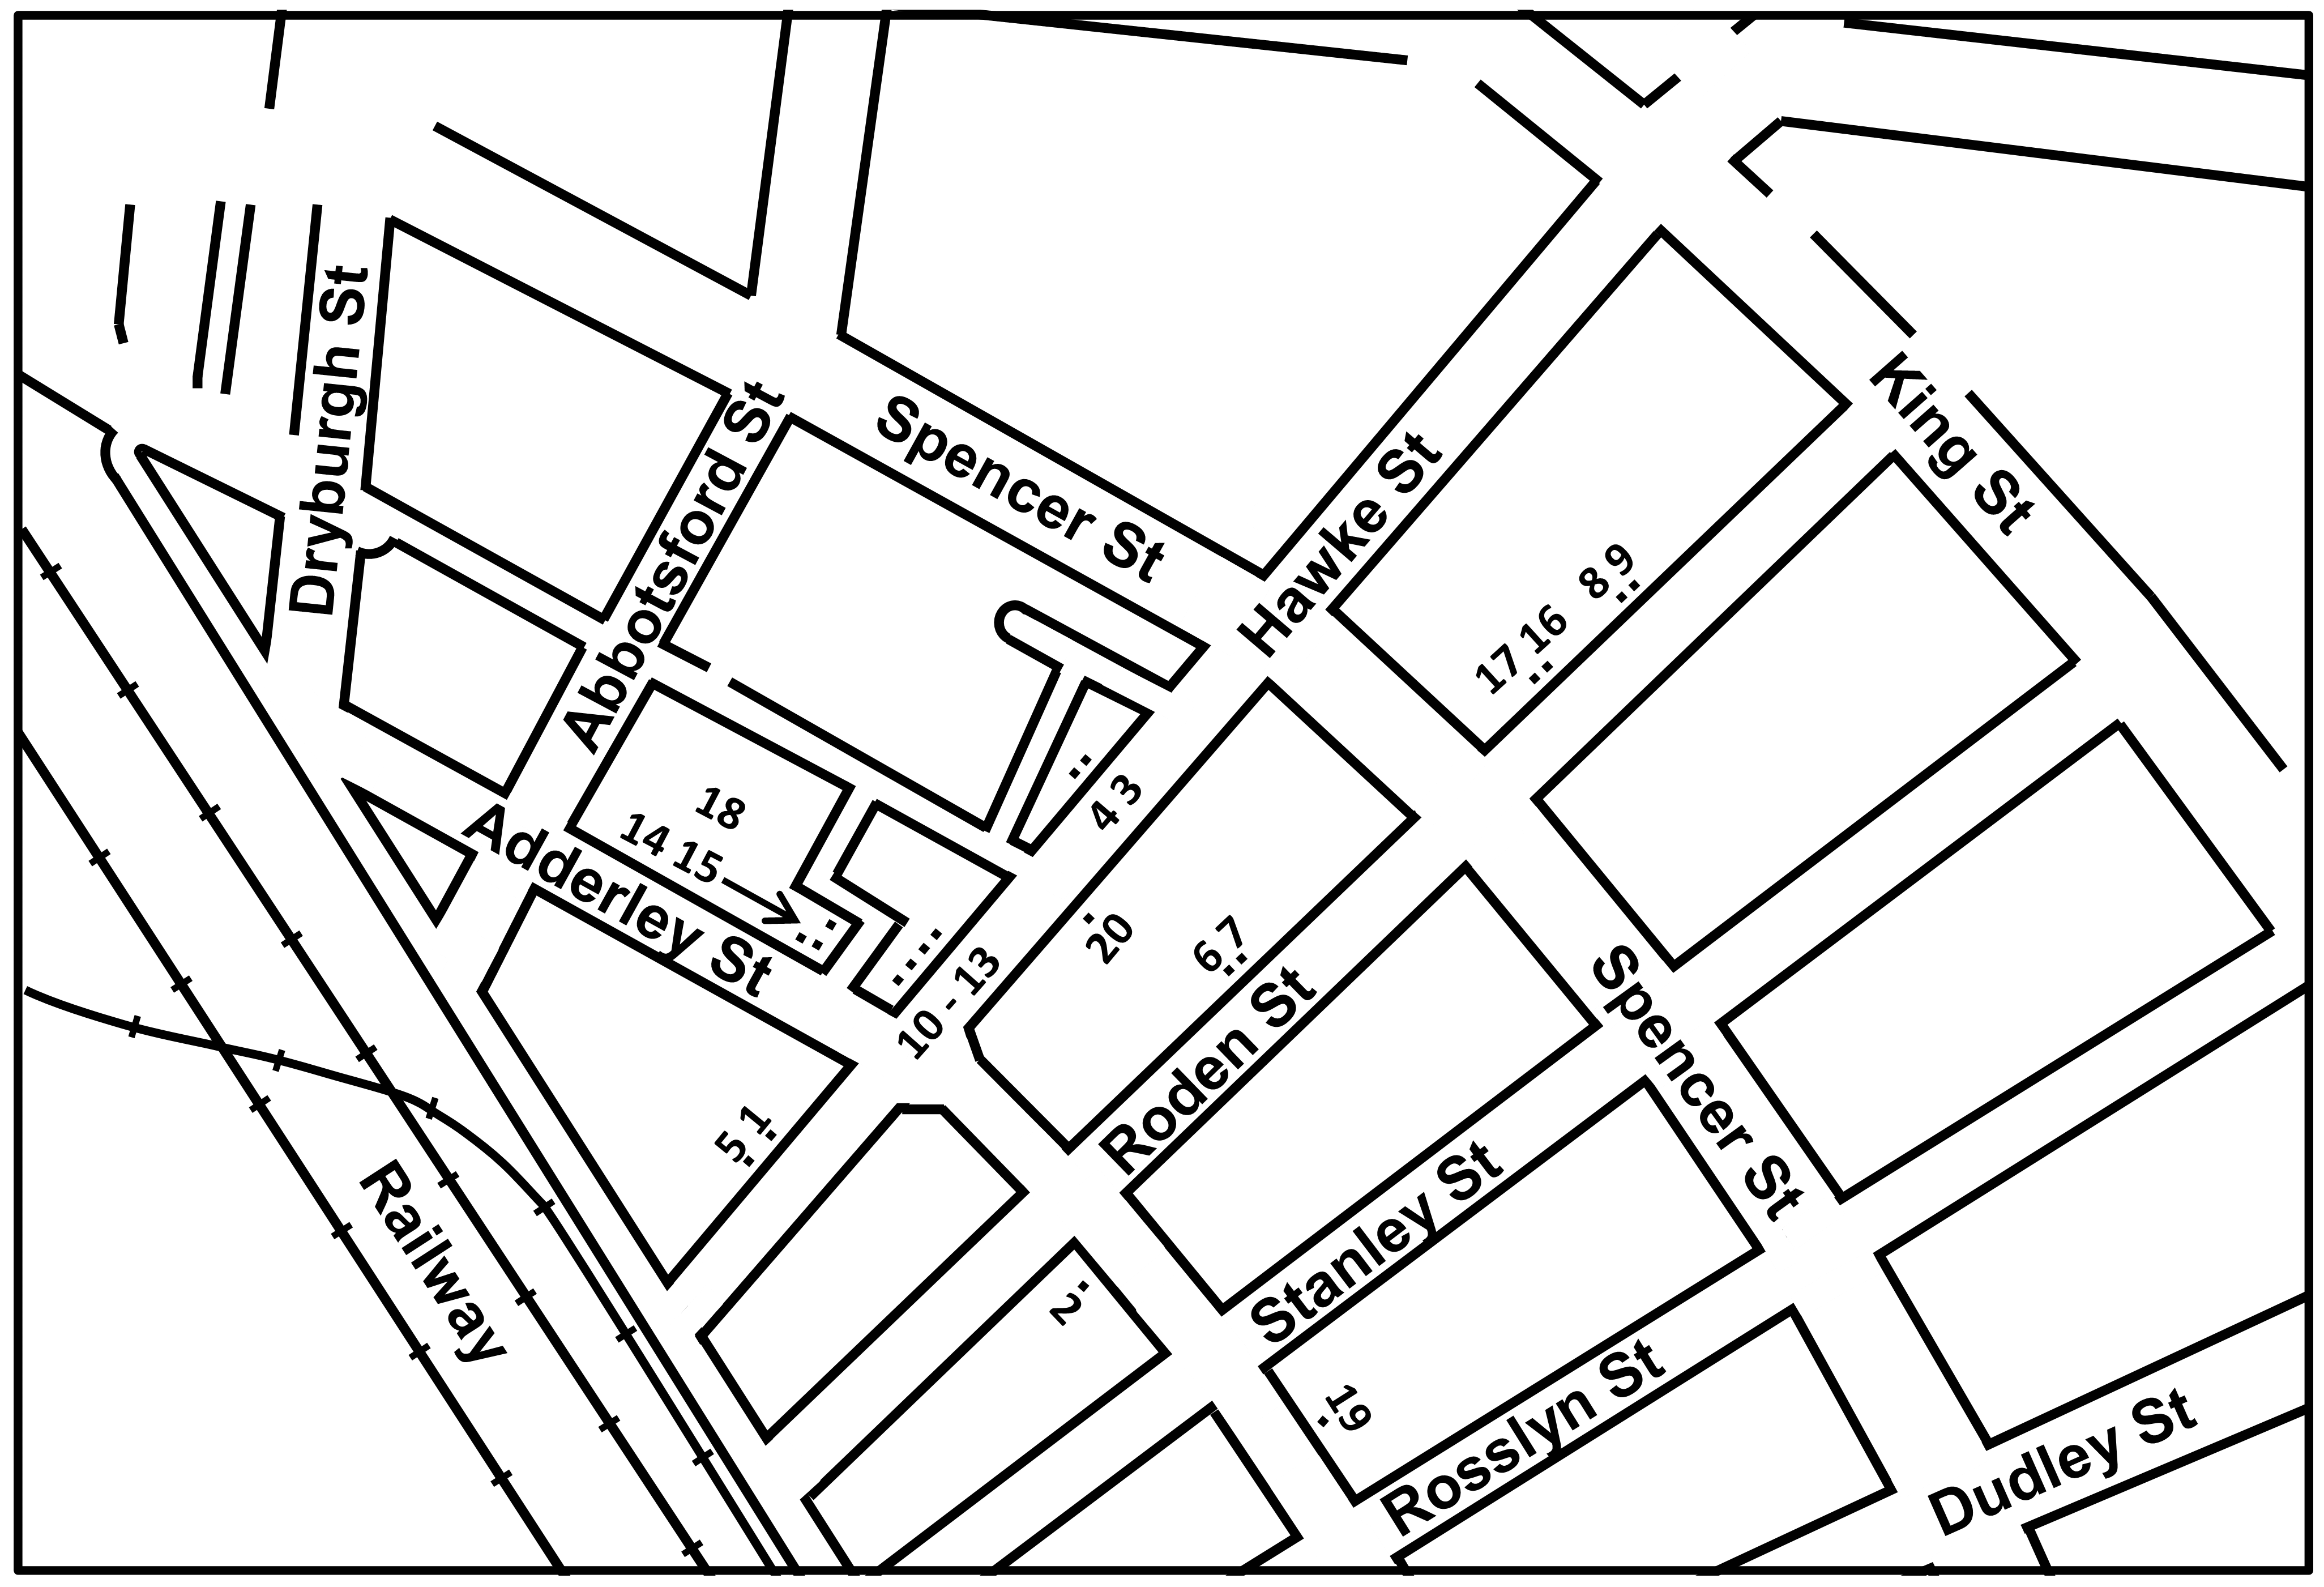 ap showing the location of the surviving homes built by John Jones 